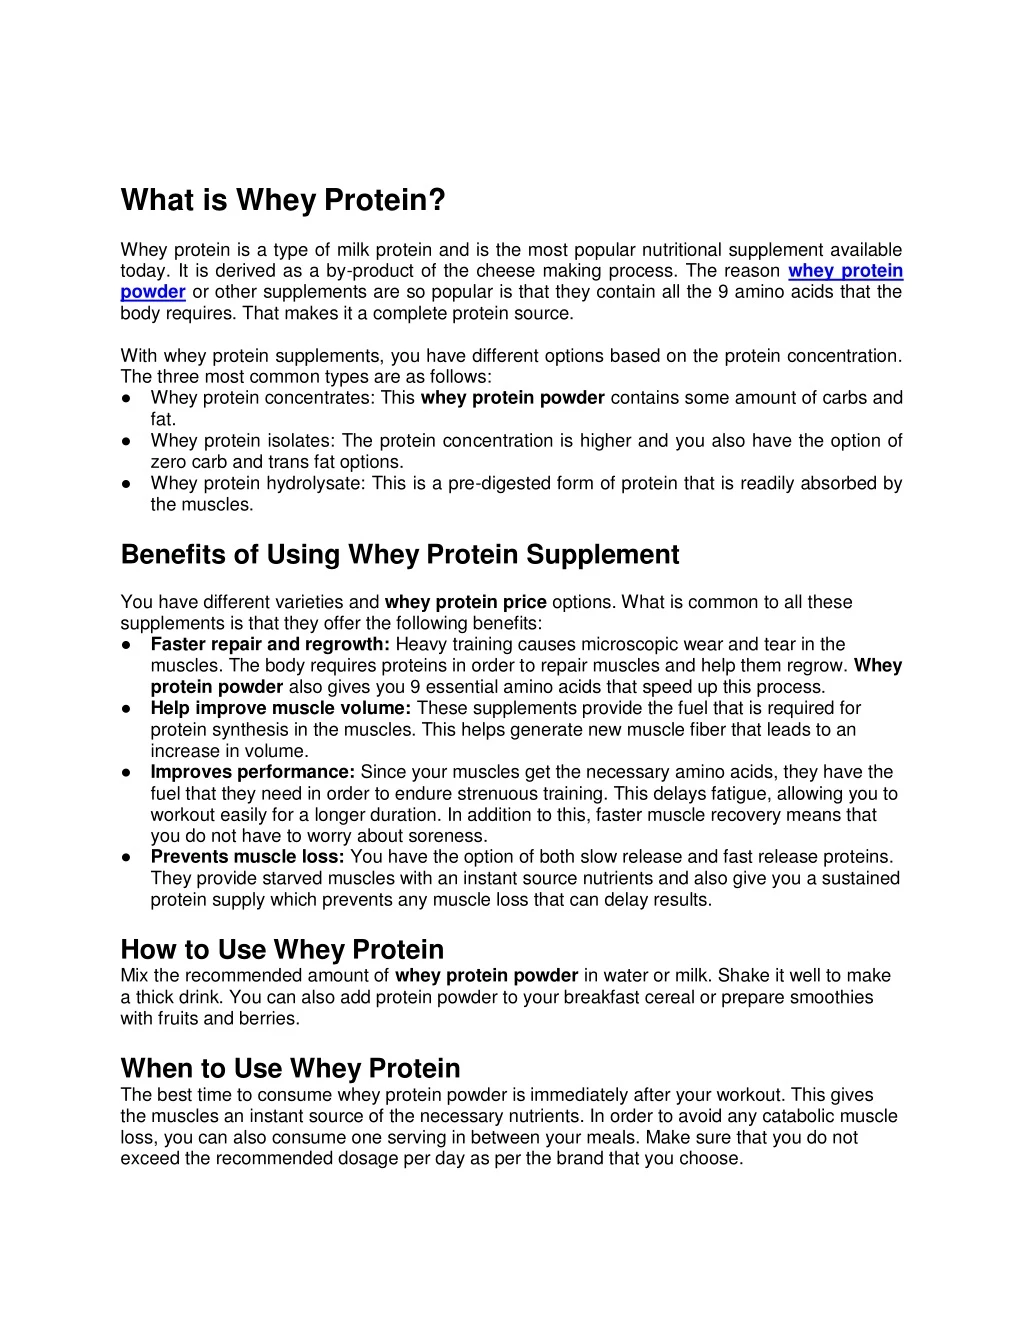 what is whey protein whey protein is a type